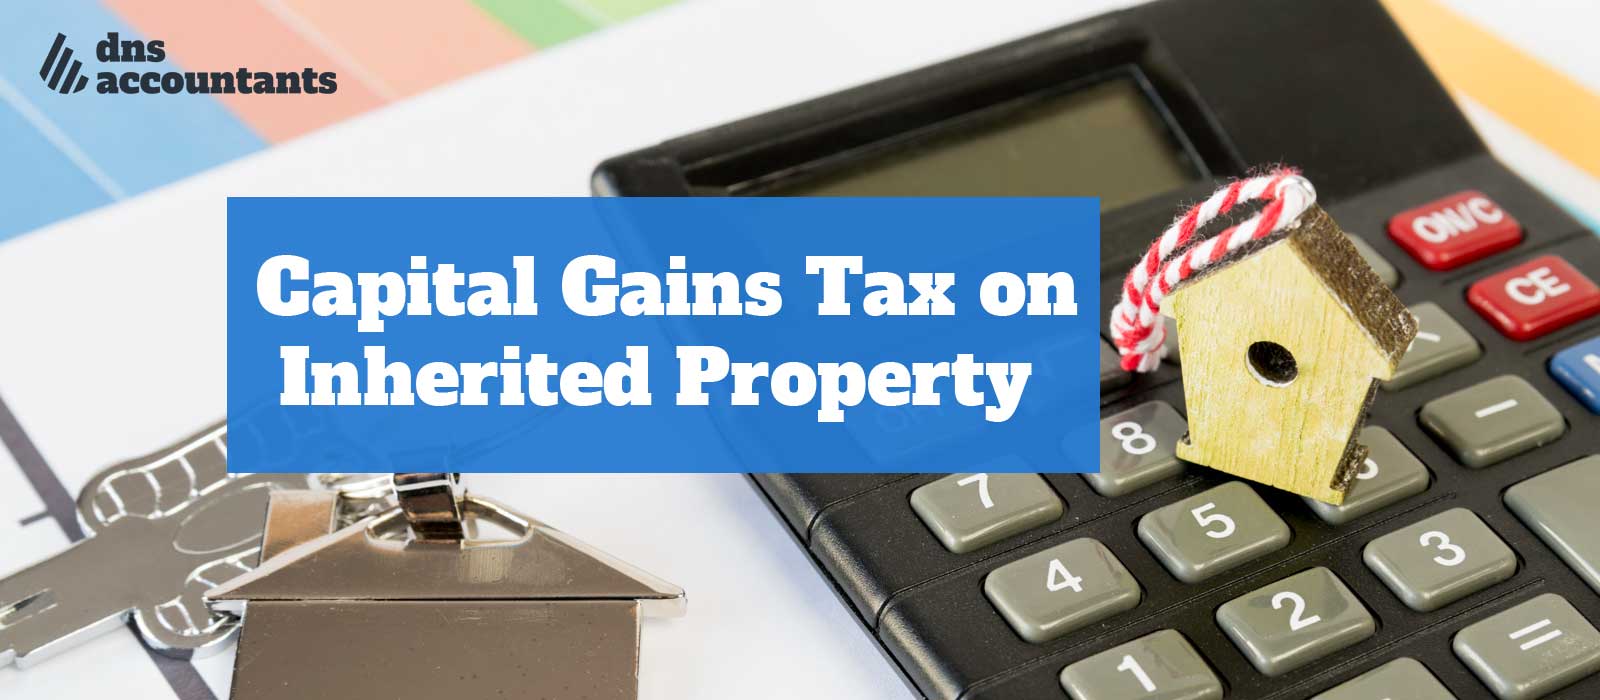 Do I have to pay Capital Gains Tax on Inherited Property?